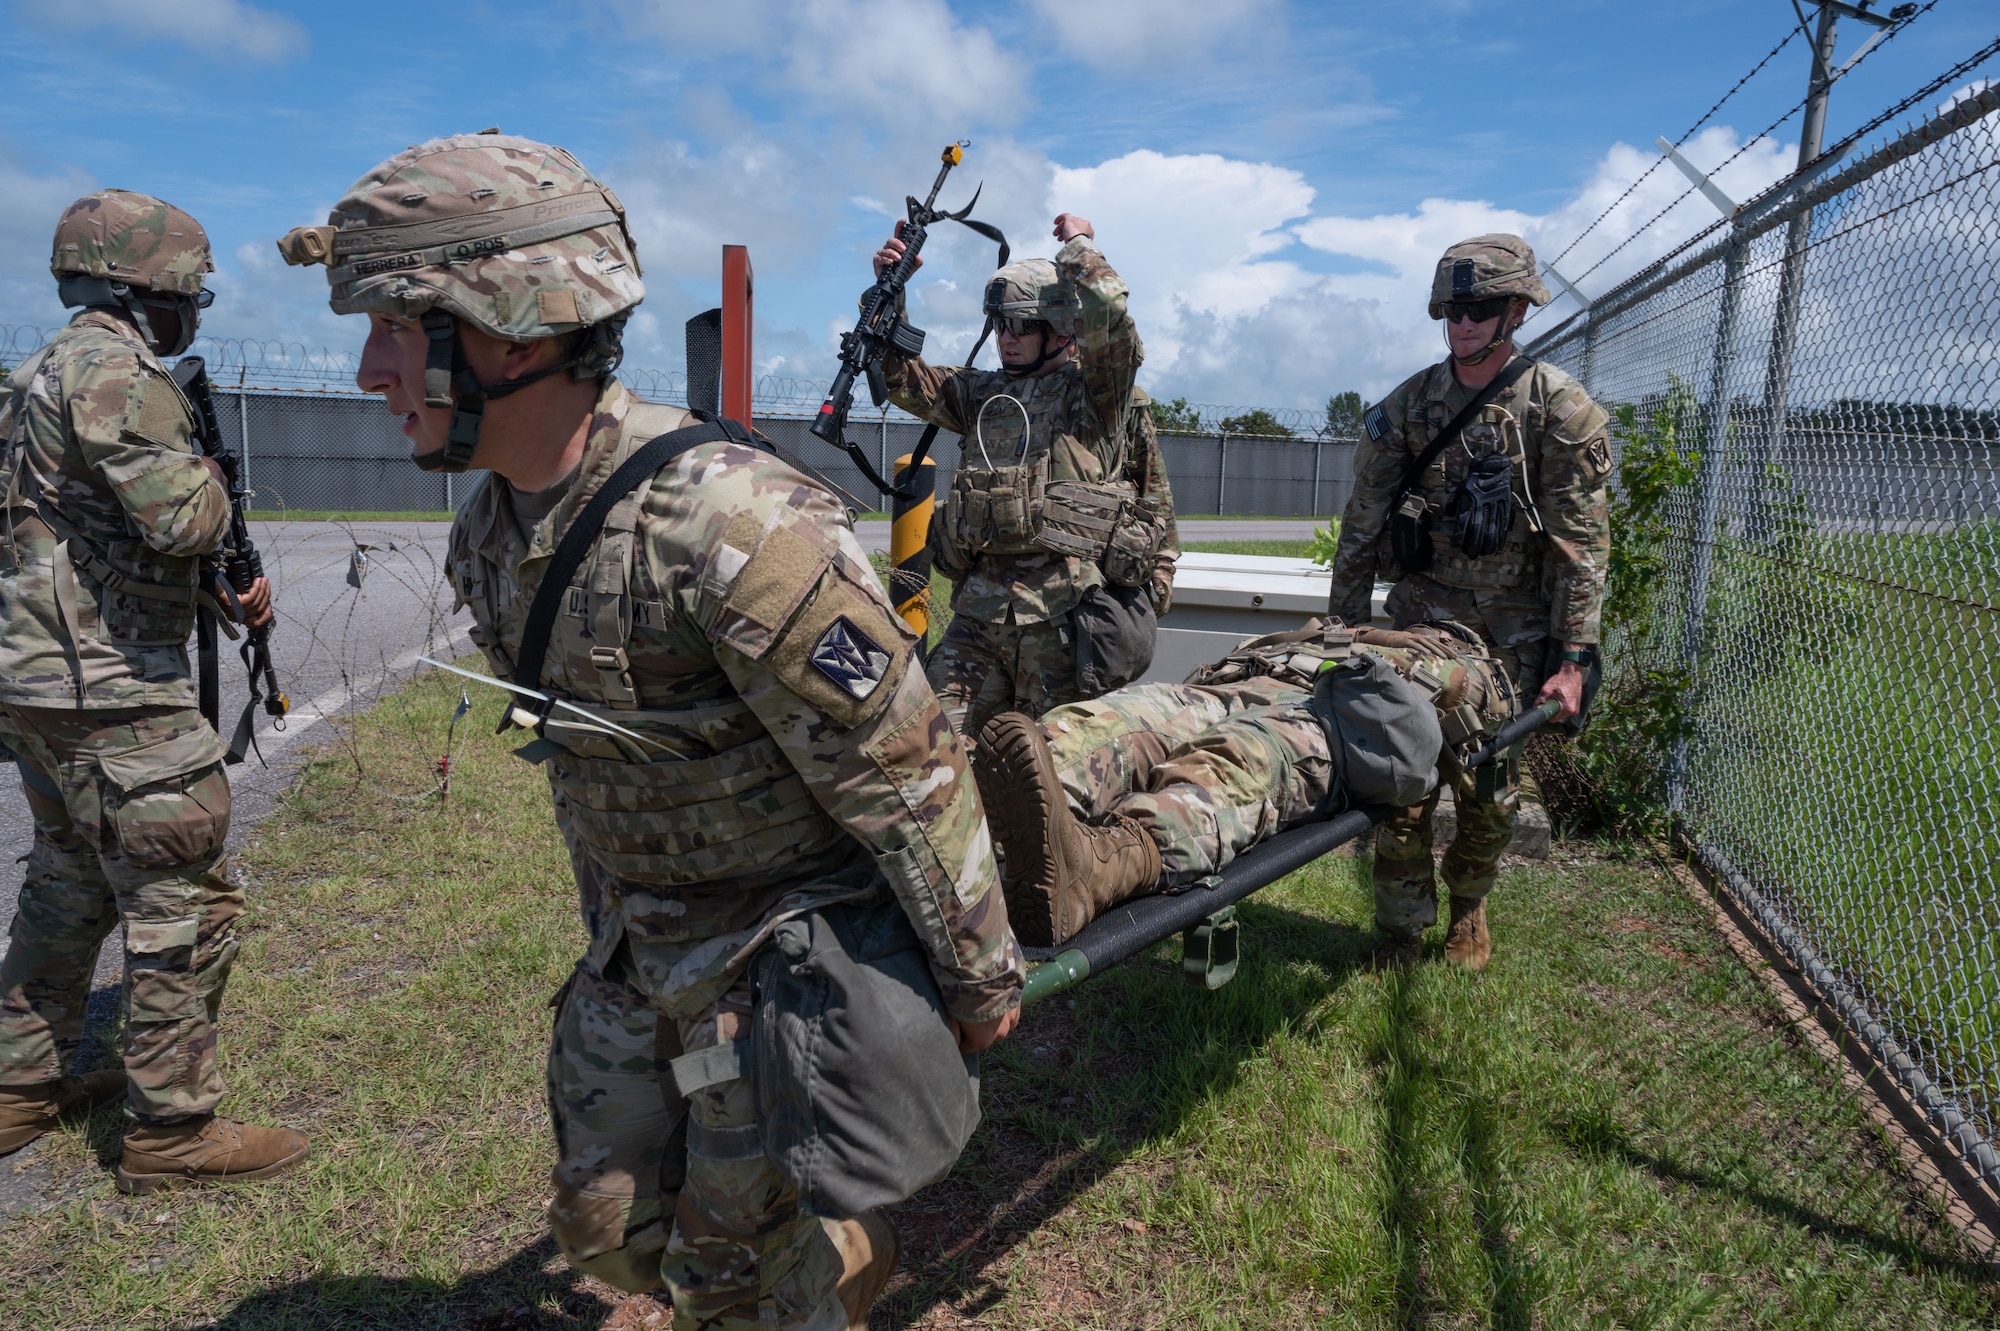 Army Soldiers carry a wounded Soldier in a simulated scenario.